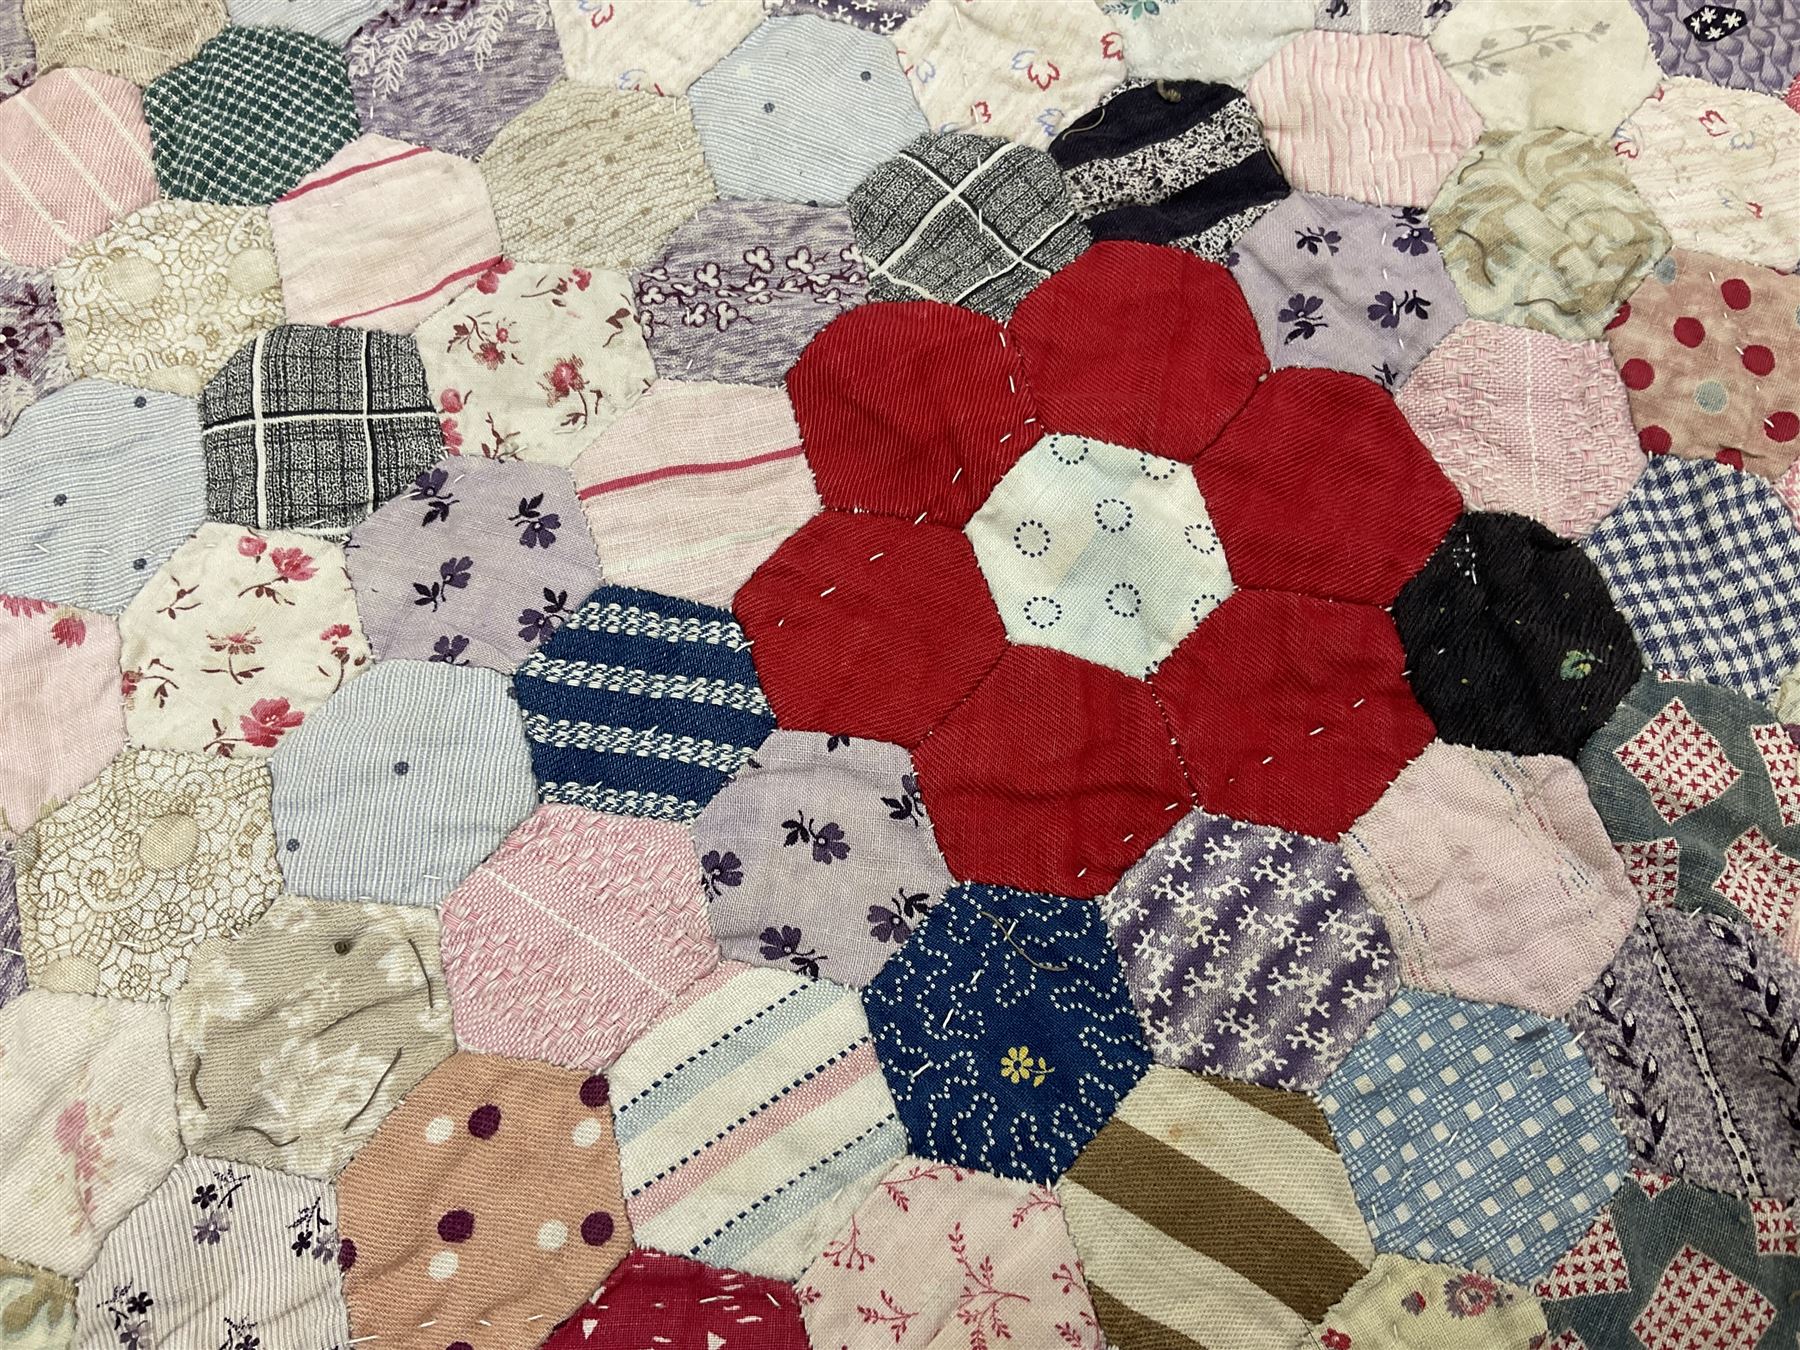 19th century patchwork quilt - Image 5 of 8